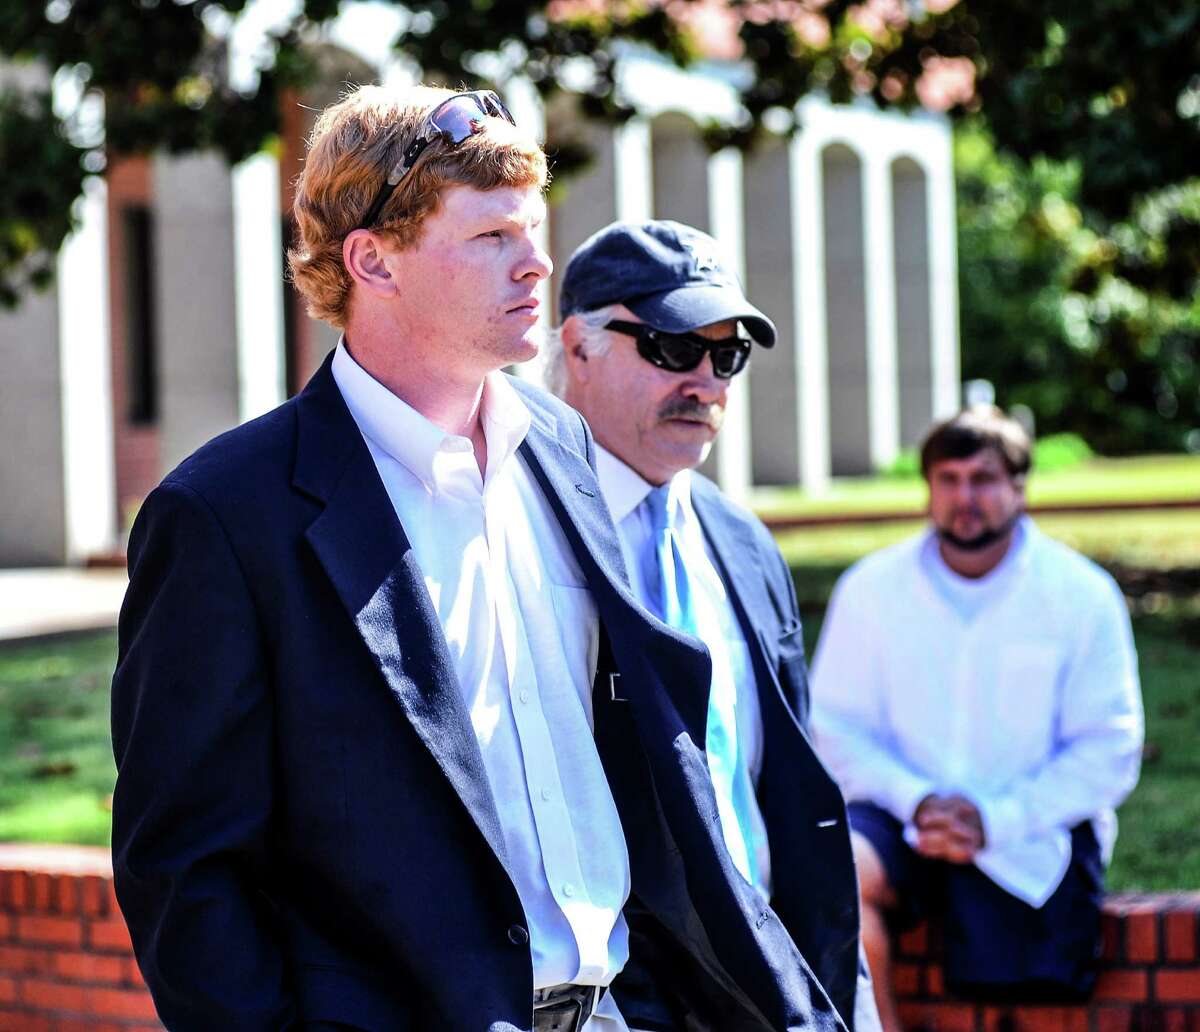 Former University of Mississippi student Graeme Phillip Harris, left, with his attorney David Hill, leaves federal court after being sentenced, Thursday, Sept. 17, 2015 in Oxford, Miss. Harris, a former University of Mississippi student who admitted helping place a noose on a statue of a civil rights activist is going to prison. U.S. District Judge Michael P. Mills sentenced Graeme Phillip Harris on Thursday to six months in prison beginning Jan. 4, followed by 12 months' supervised release. (Bruce Newman/The Oxford Eagle via AP) NO SALES; MANDATORY CREDIT